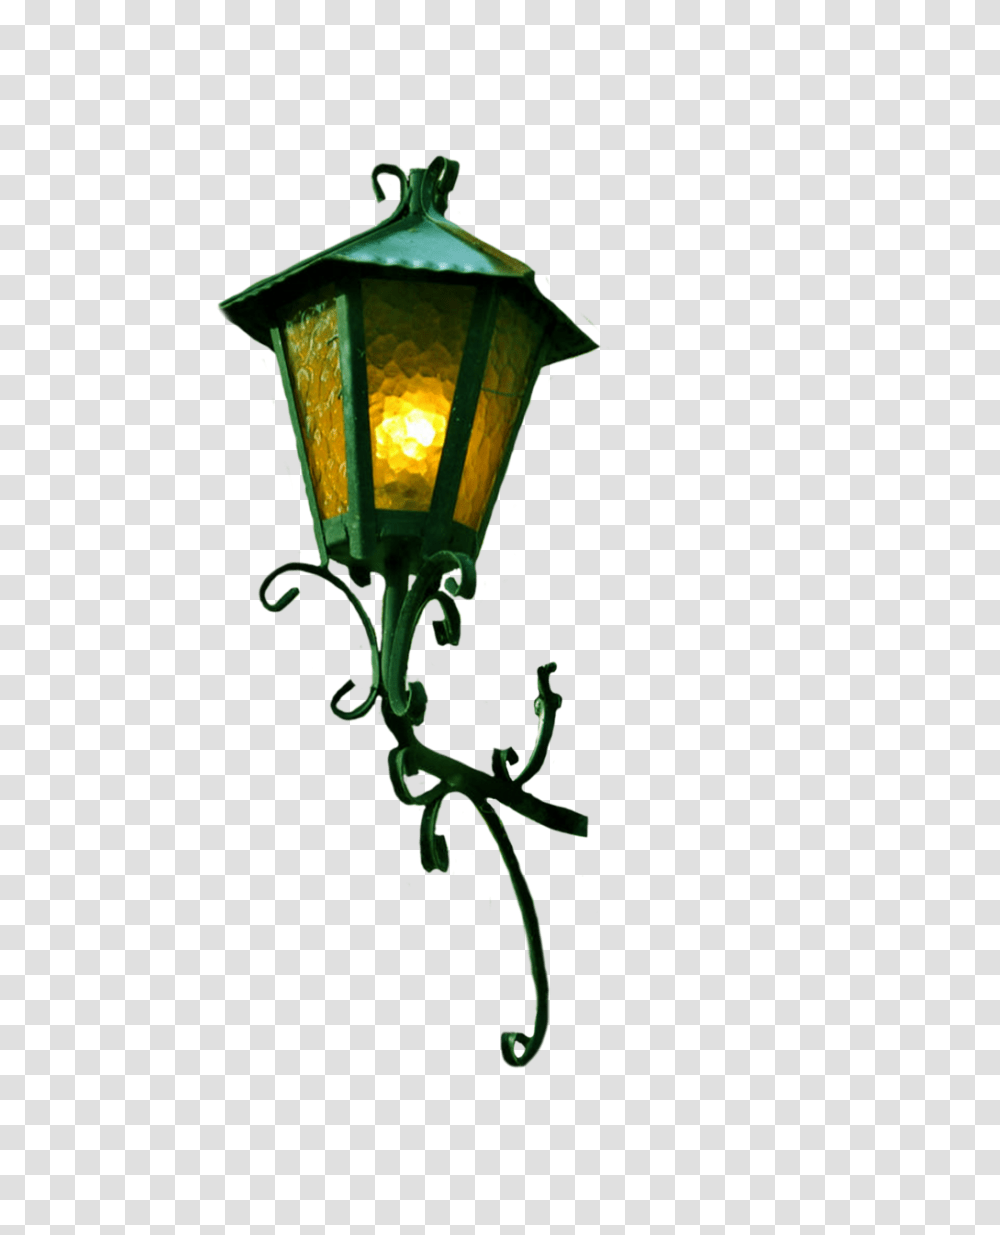 Lights Clipart Party Light Old Wall Lamp, Lampshade, Lamp Post Transparent Png